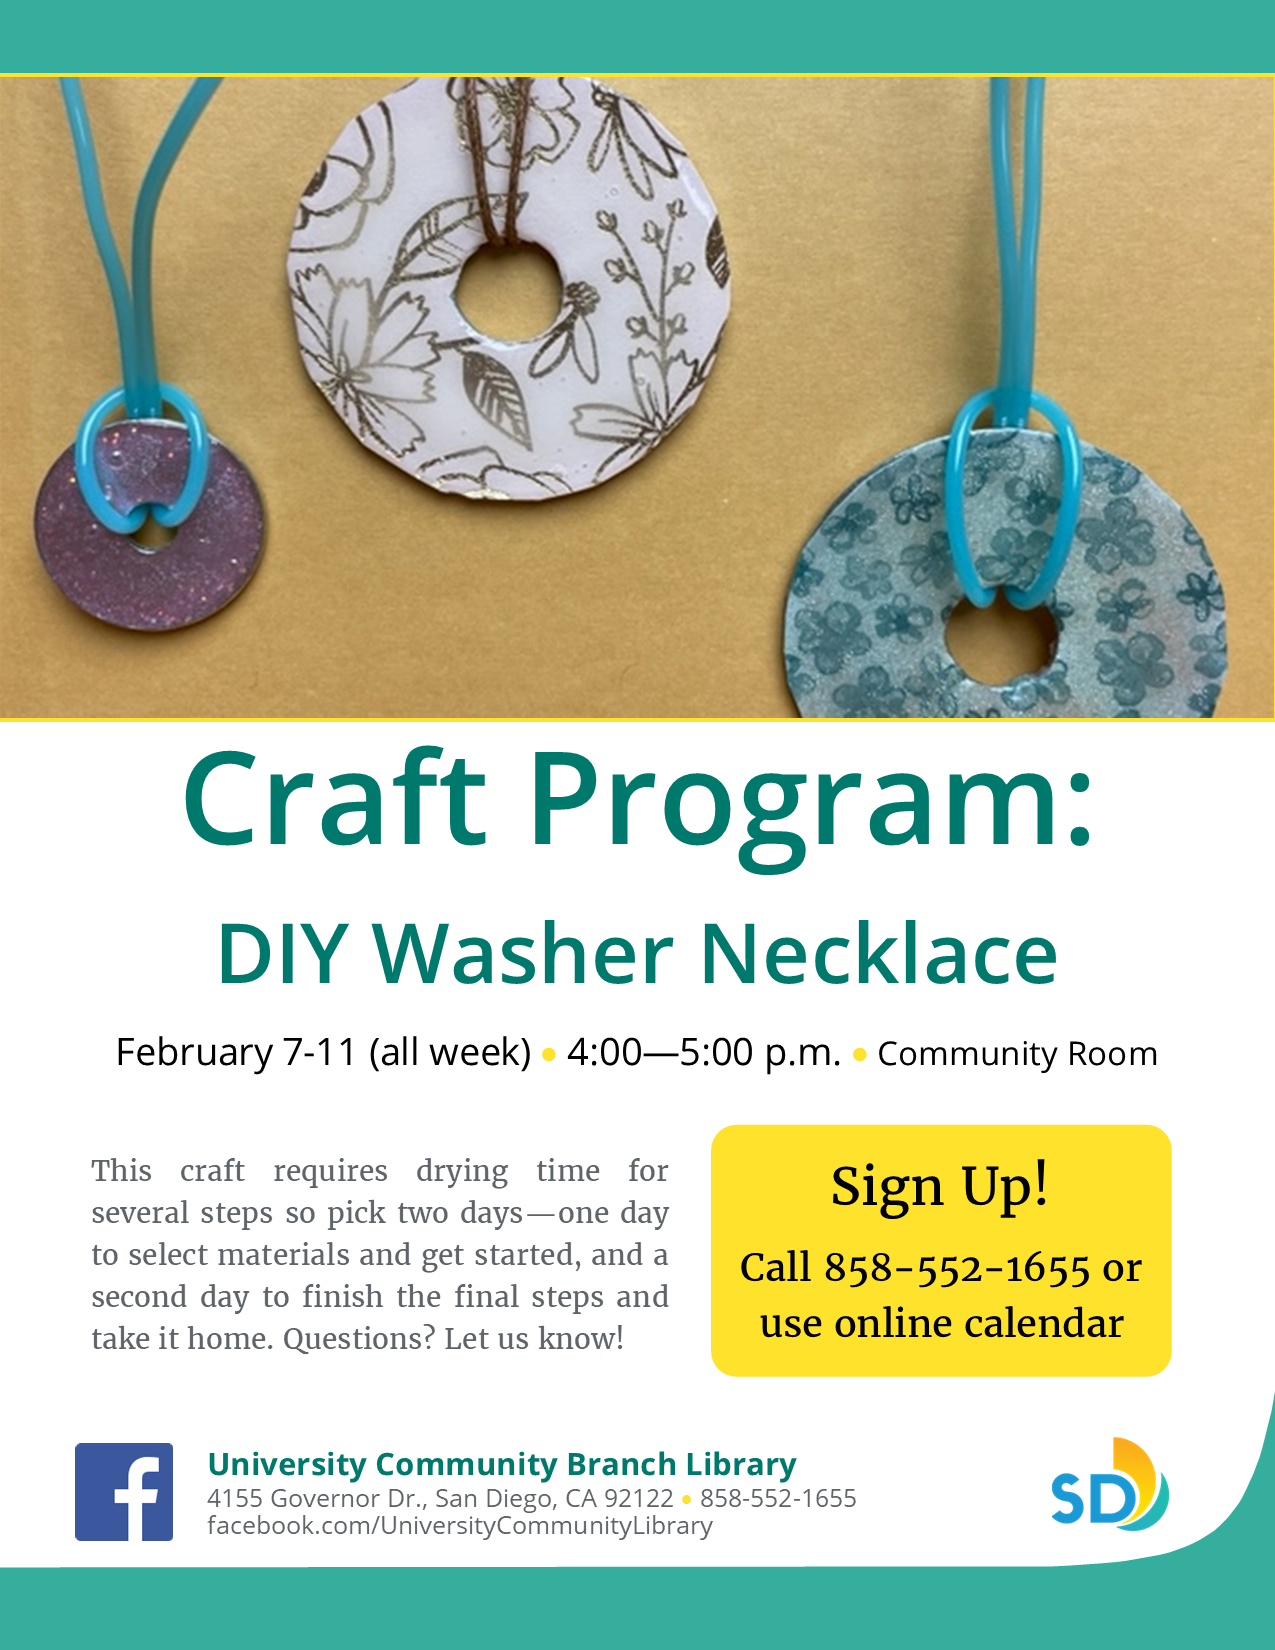 Flyer with washer necklace image and program description.